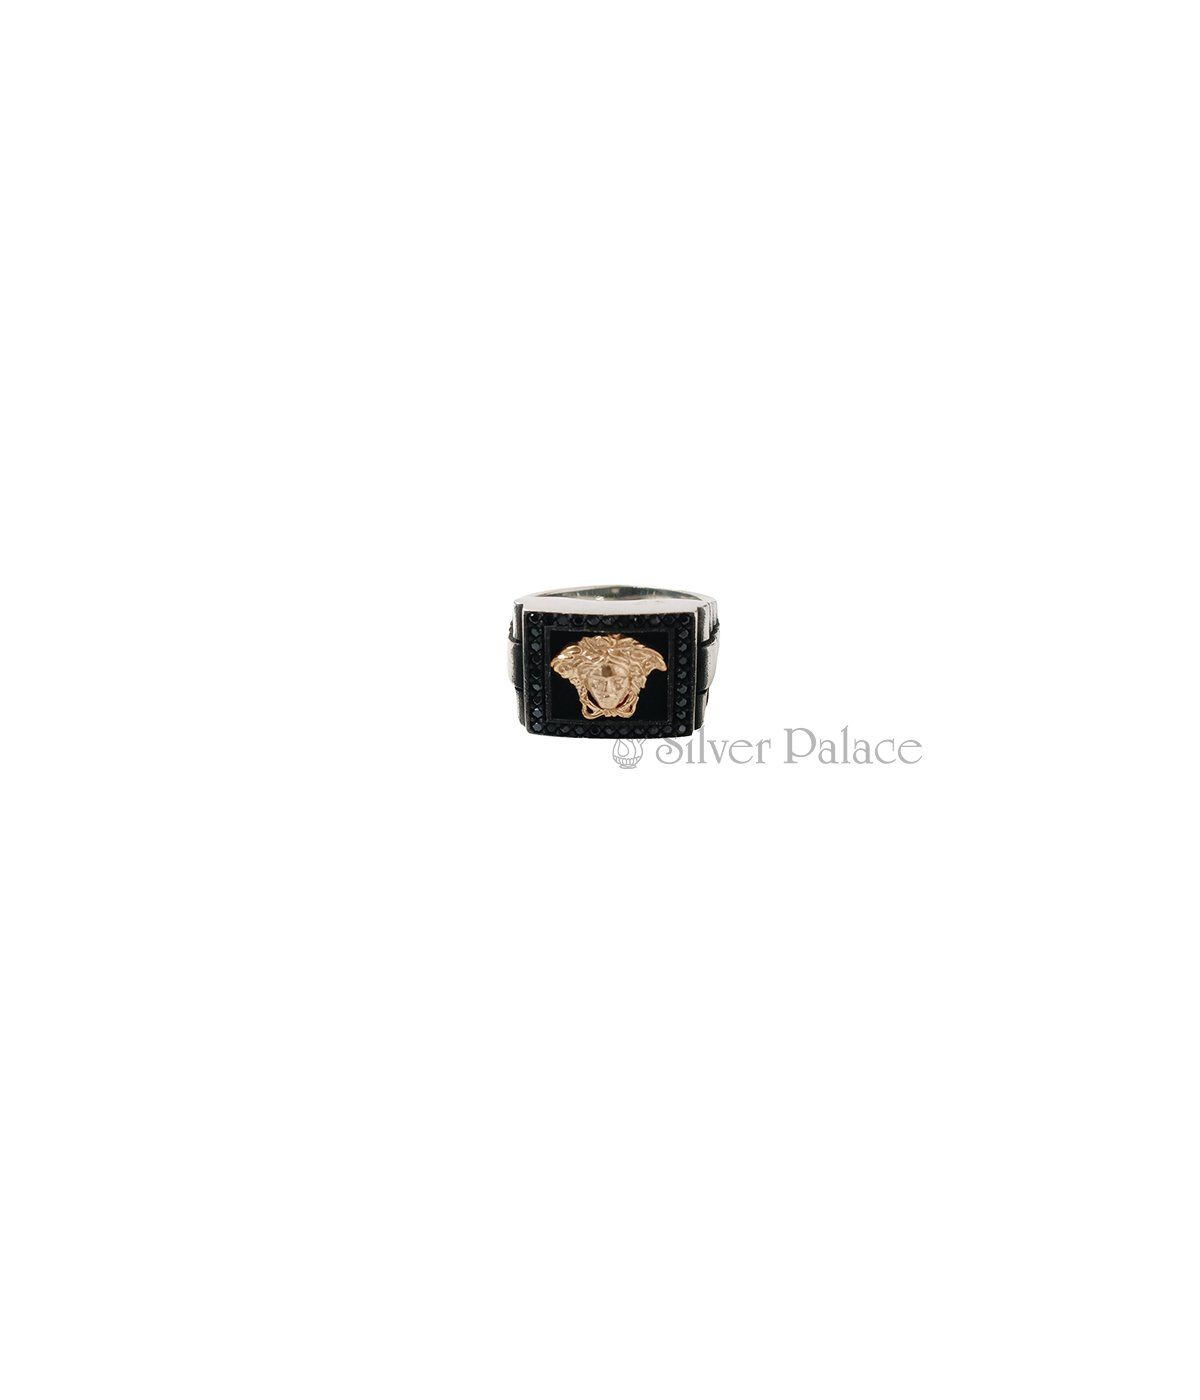 STERLING SILVER VERSACE LUXURY RING